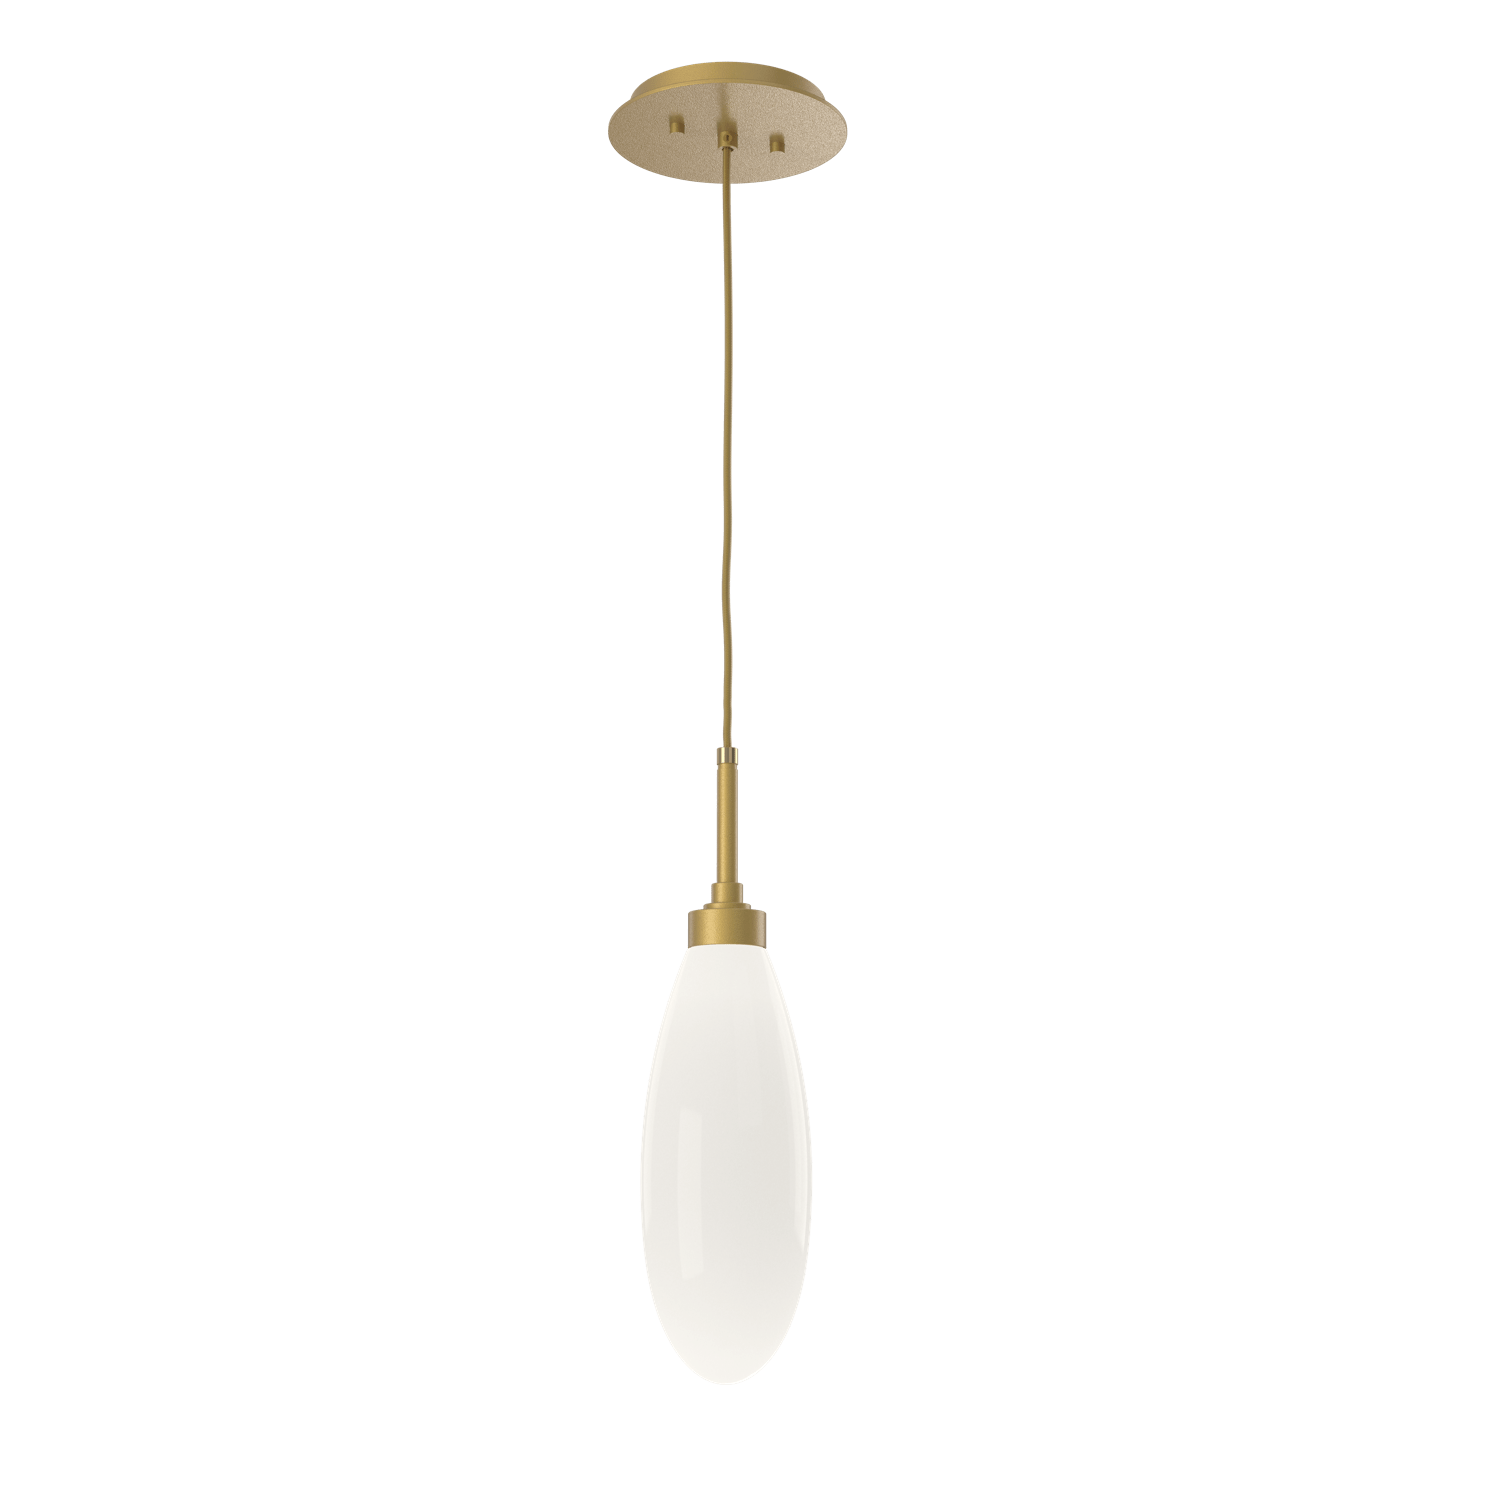 LAB0071-15-GB-WL-LL-Hammerton-Studio-Fiori-pendant-light-with-gilded-brass-finish-and-opal-white-glass-shades-and-LED-lamping